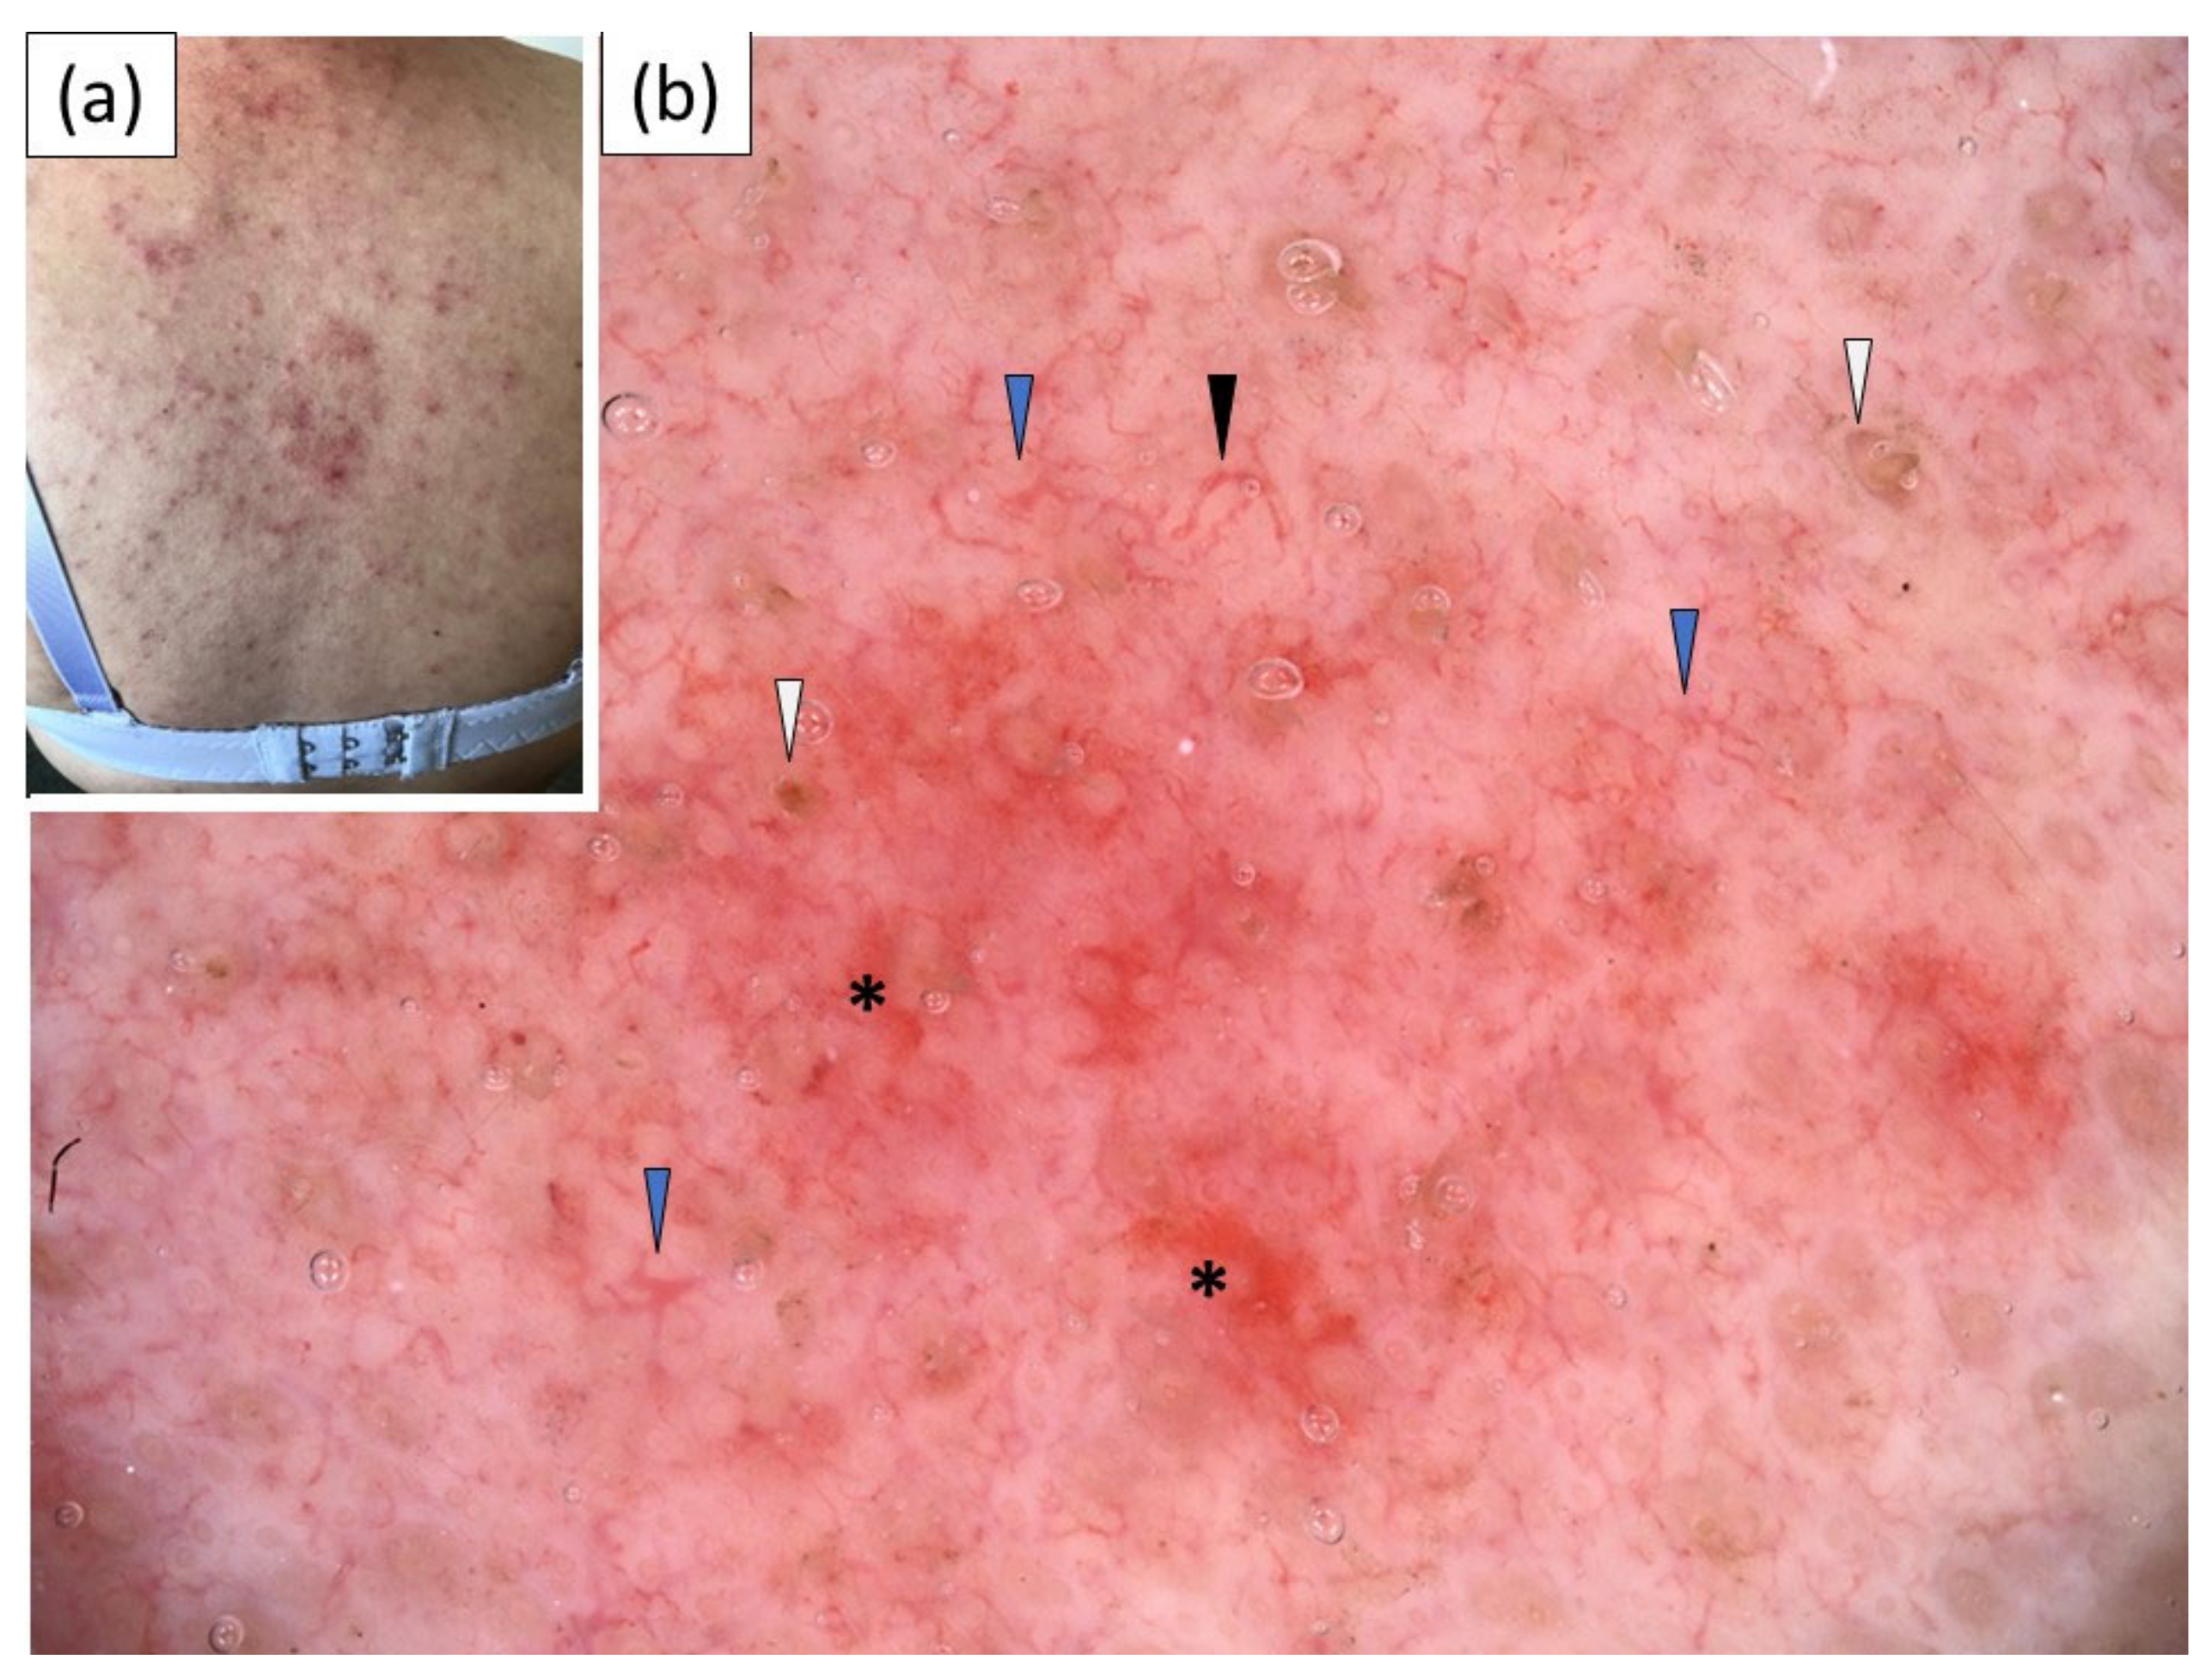 Jcm Free Full Text Dermoscopic Features Of Acute Subacute Chronic And Intermittent Subtypes Cutaneous Lupus Erythematosus In Caucasians